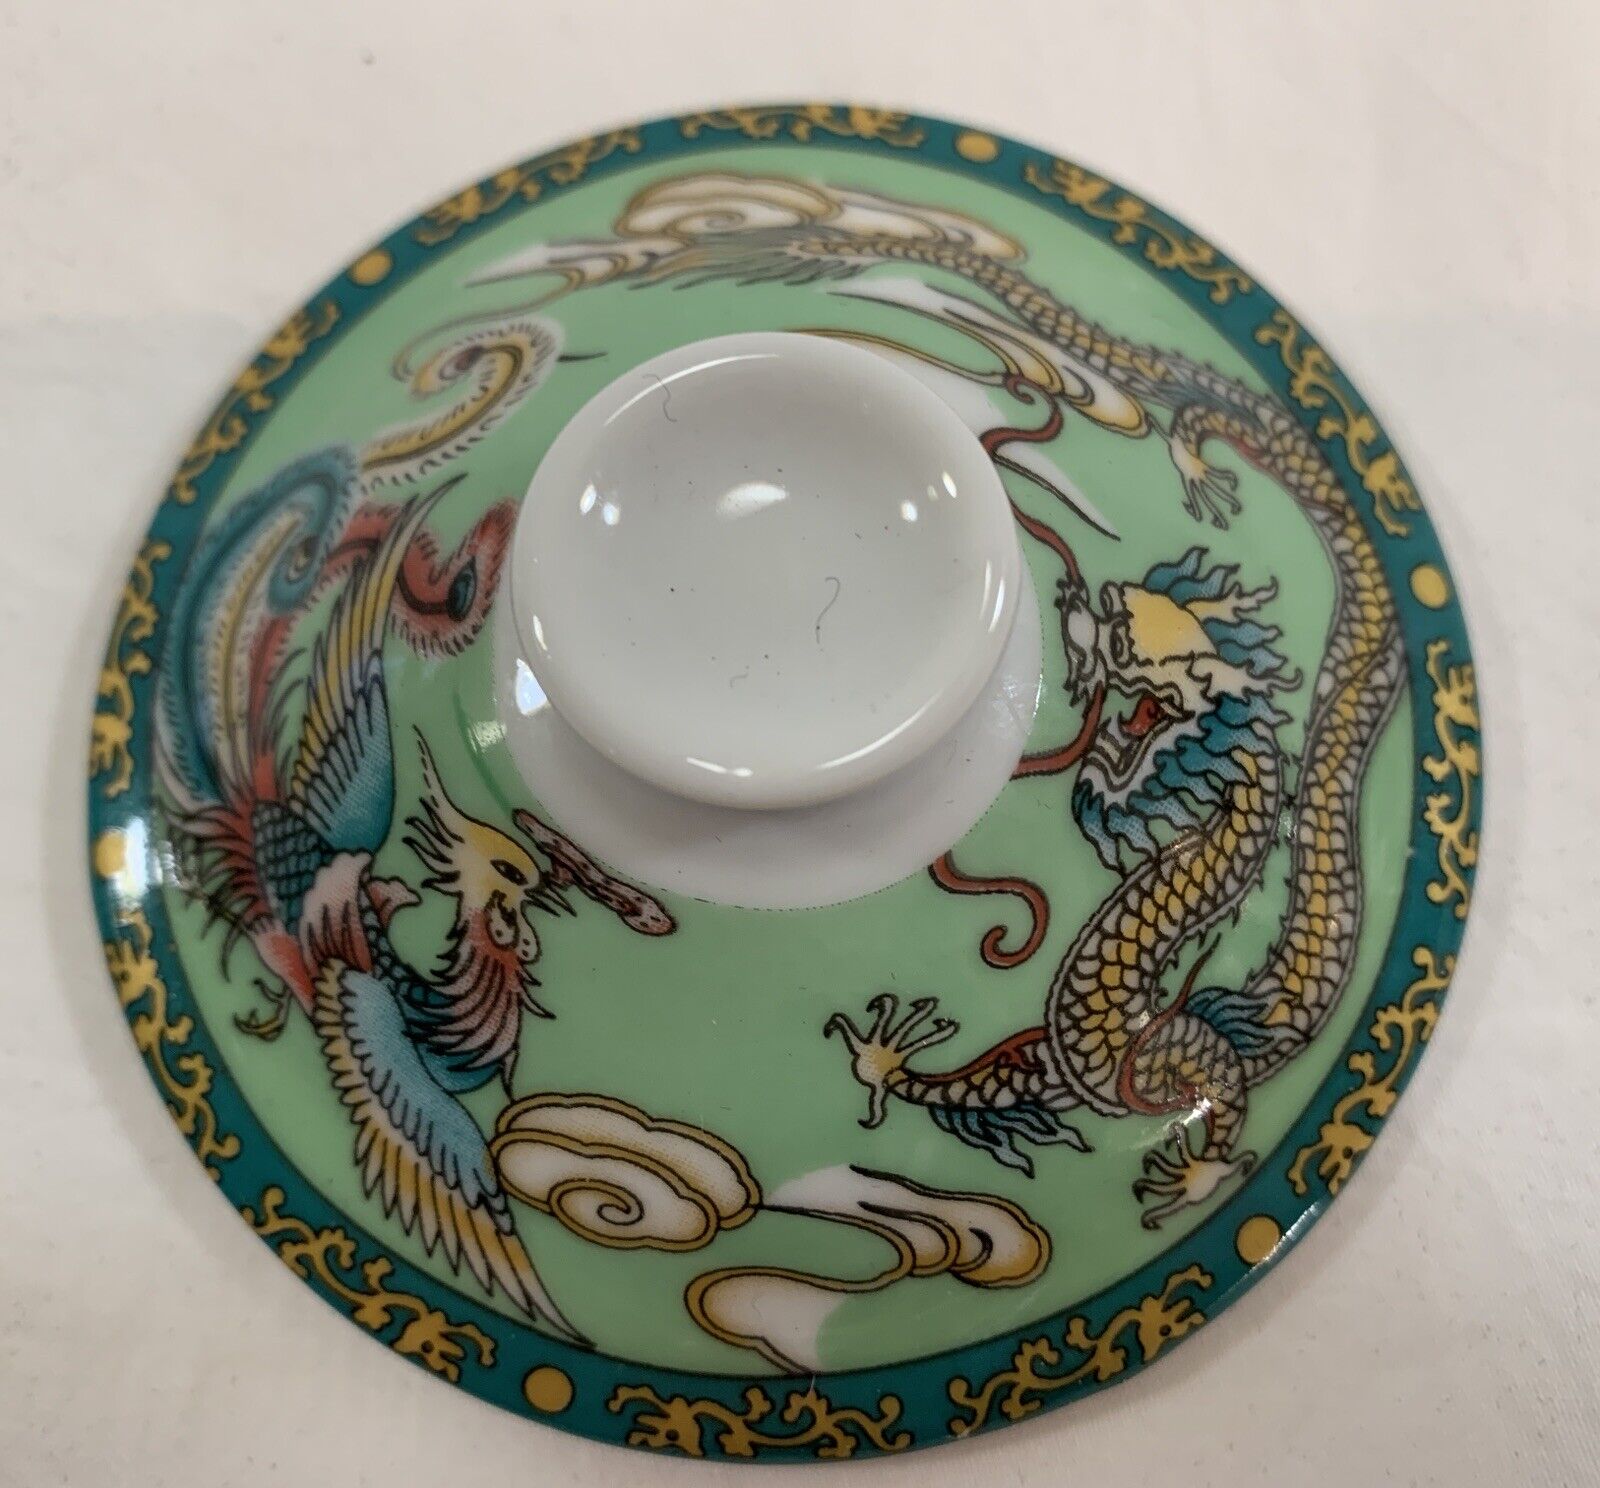 Cheng’s White Jade Porcelain  Replacement Mug LID  ONLY Dragon & Phoenix